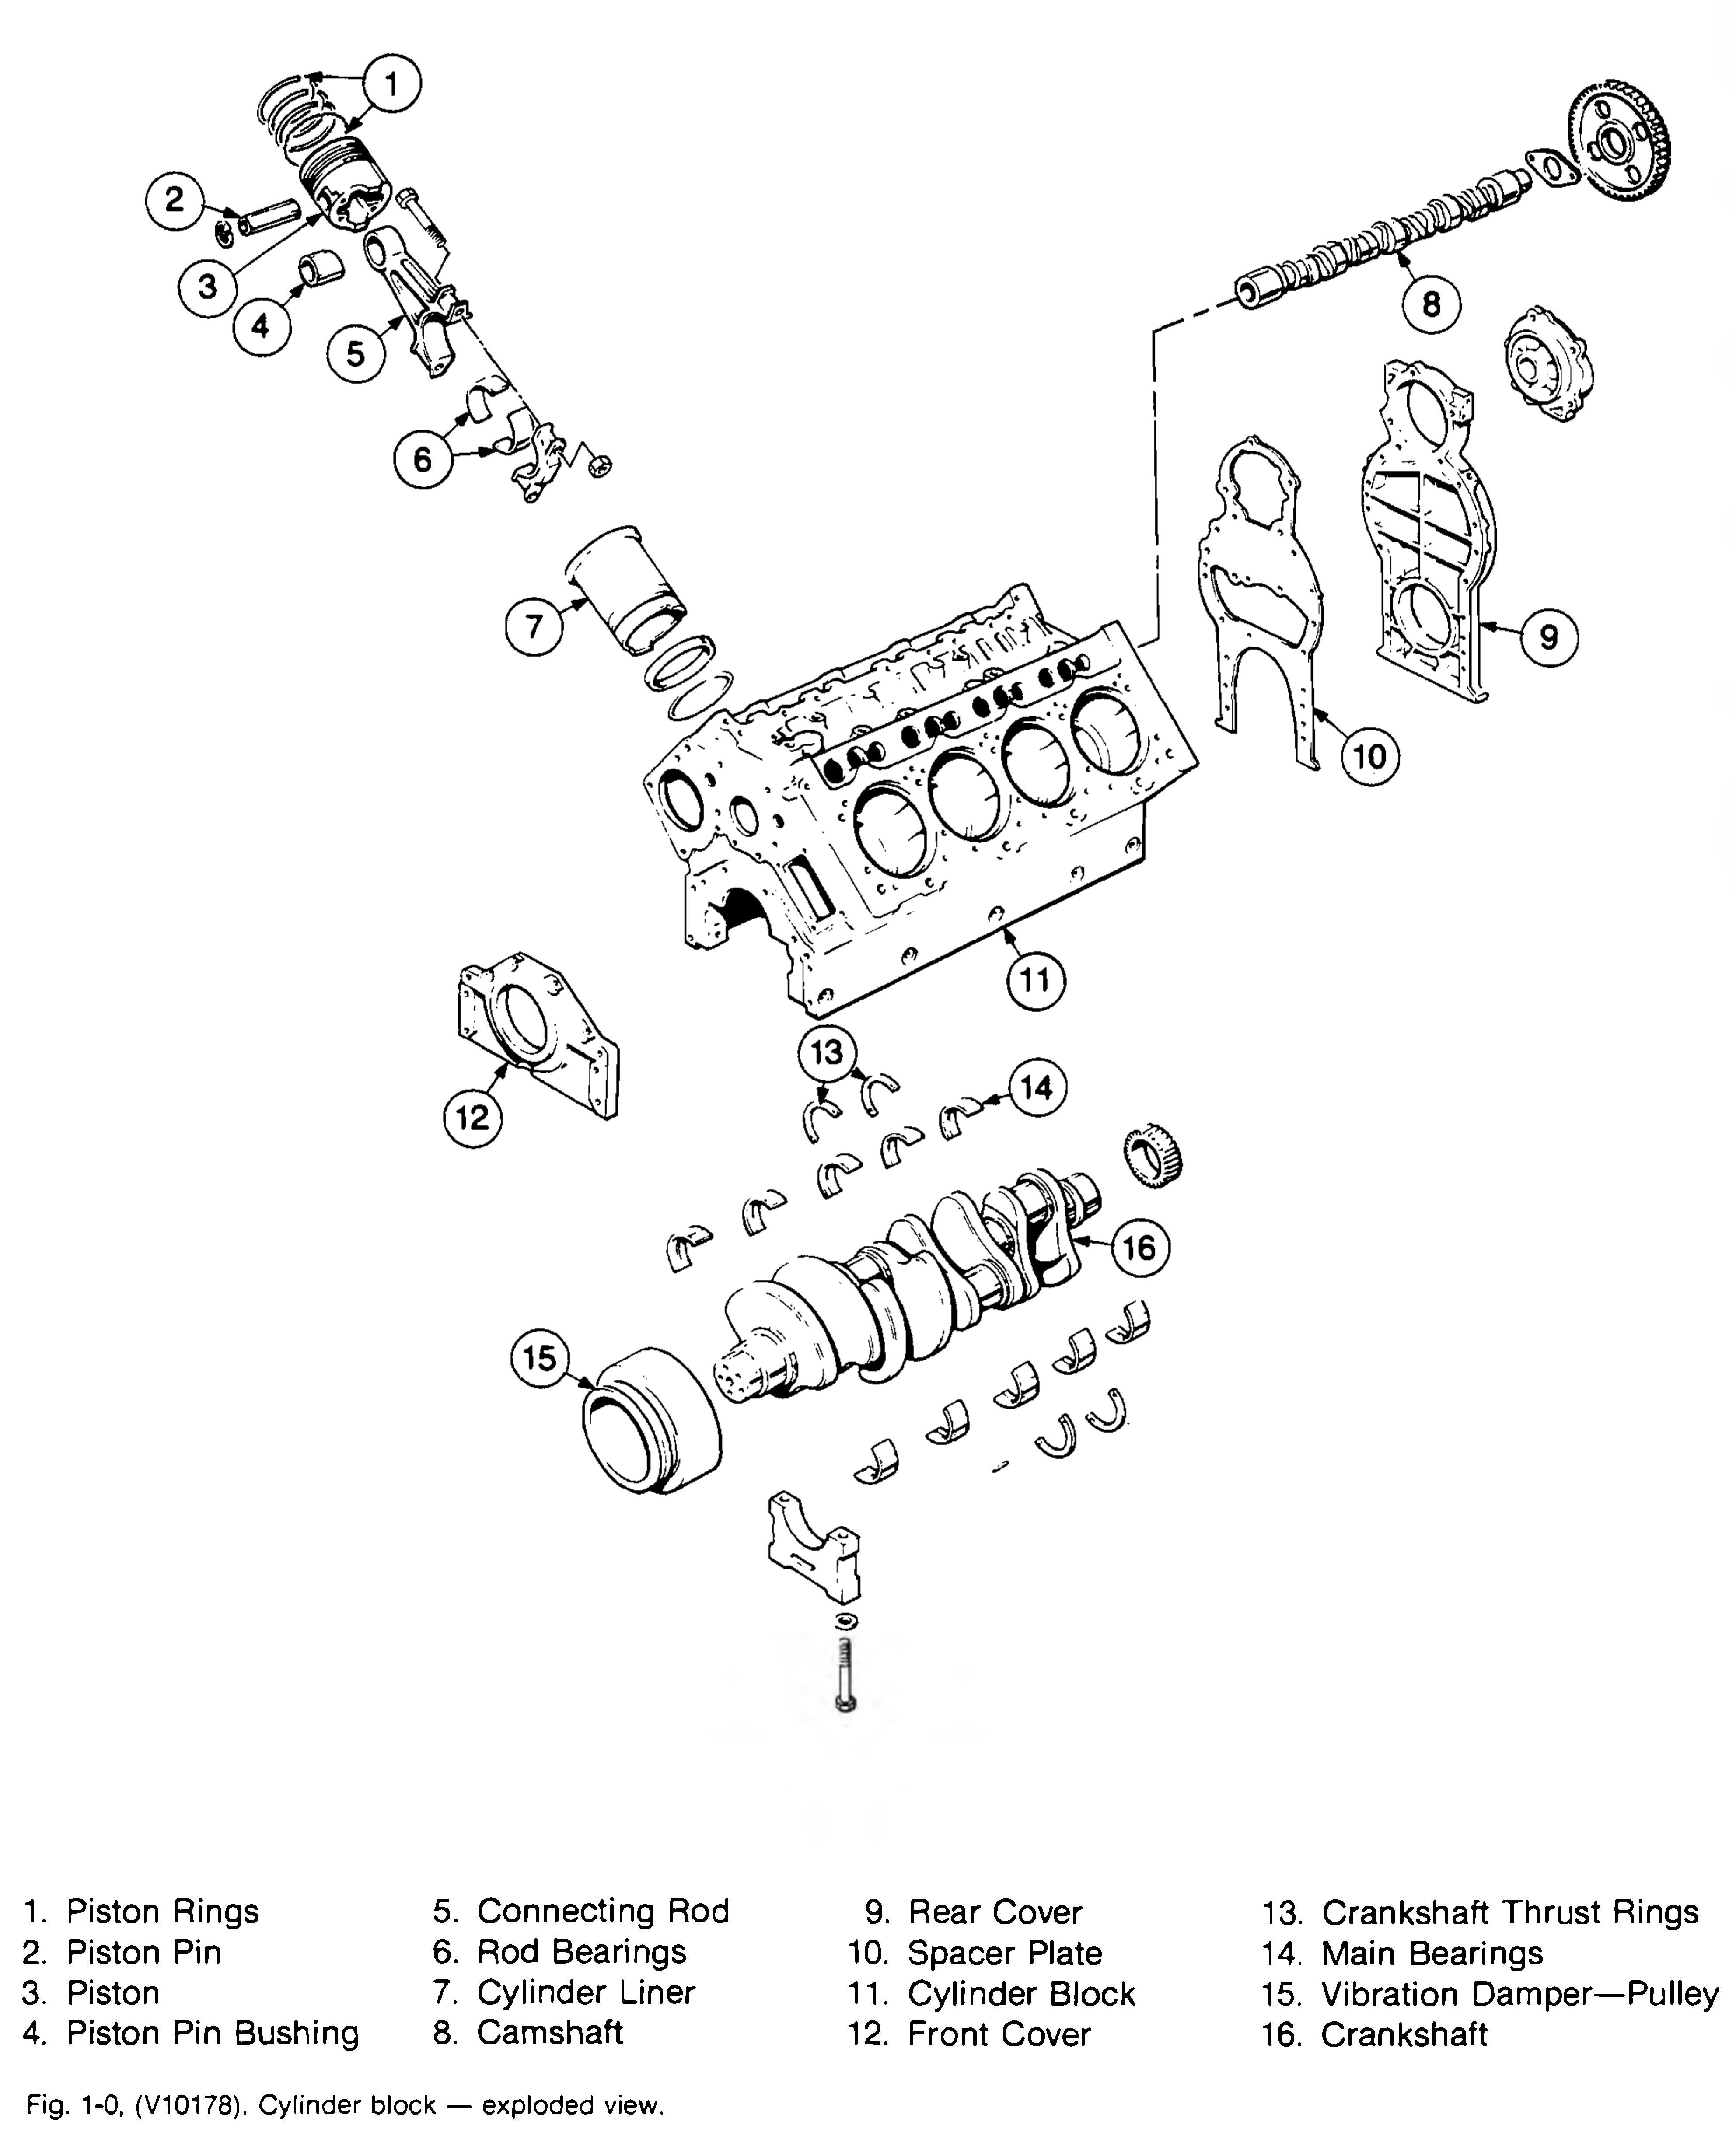 Engine Piston Diagram Explded View Of the V Type Cummins Engine Of Engine Piston Diagram